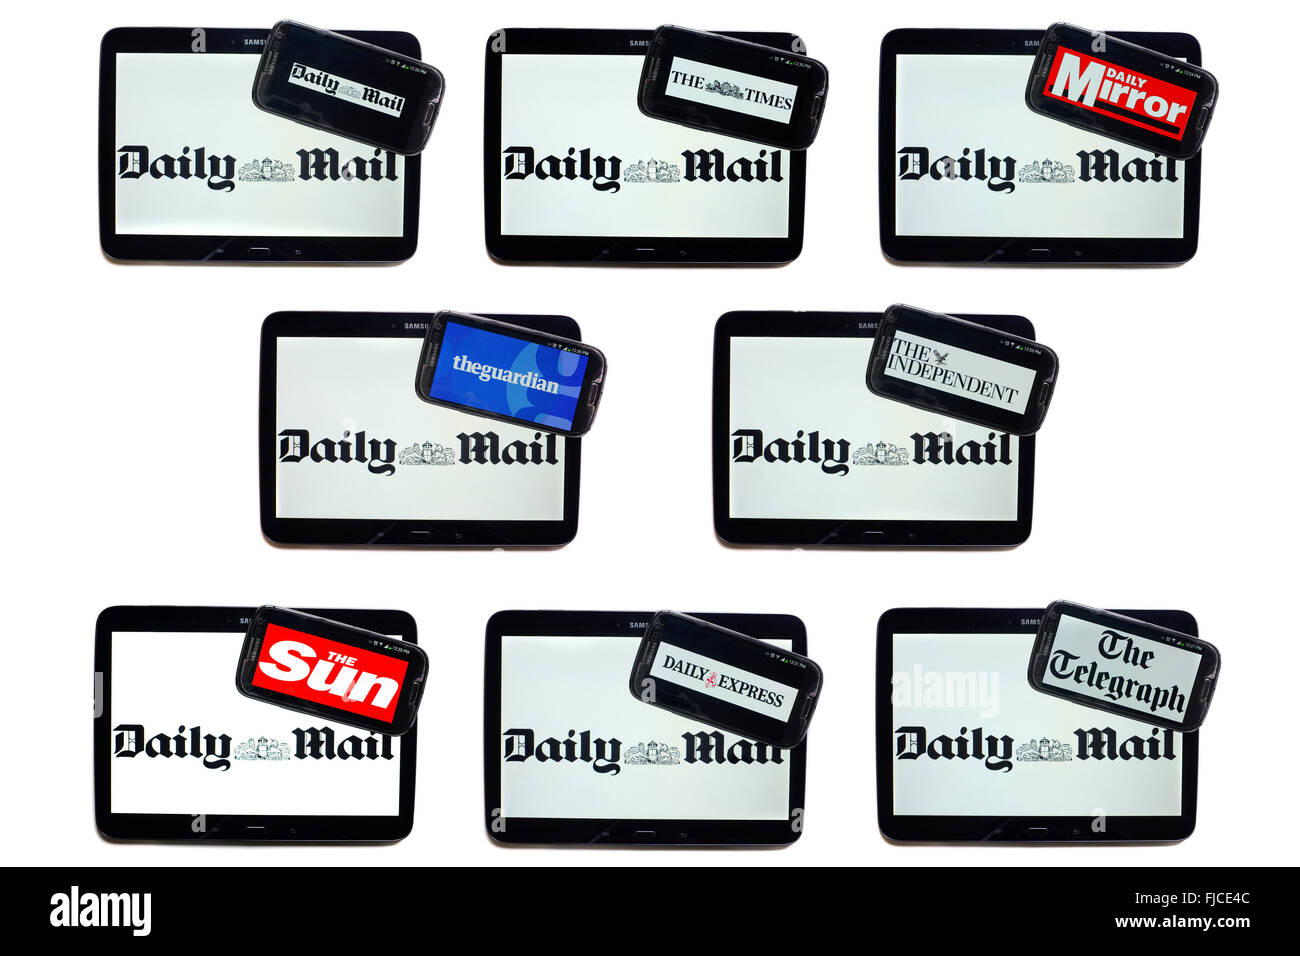 The Daily Mail newspaper logo on tablet screens surrounded by smartphones displaying the logos of rival newspapers. Stock Photo